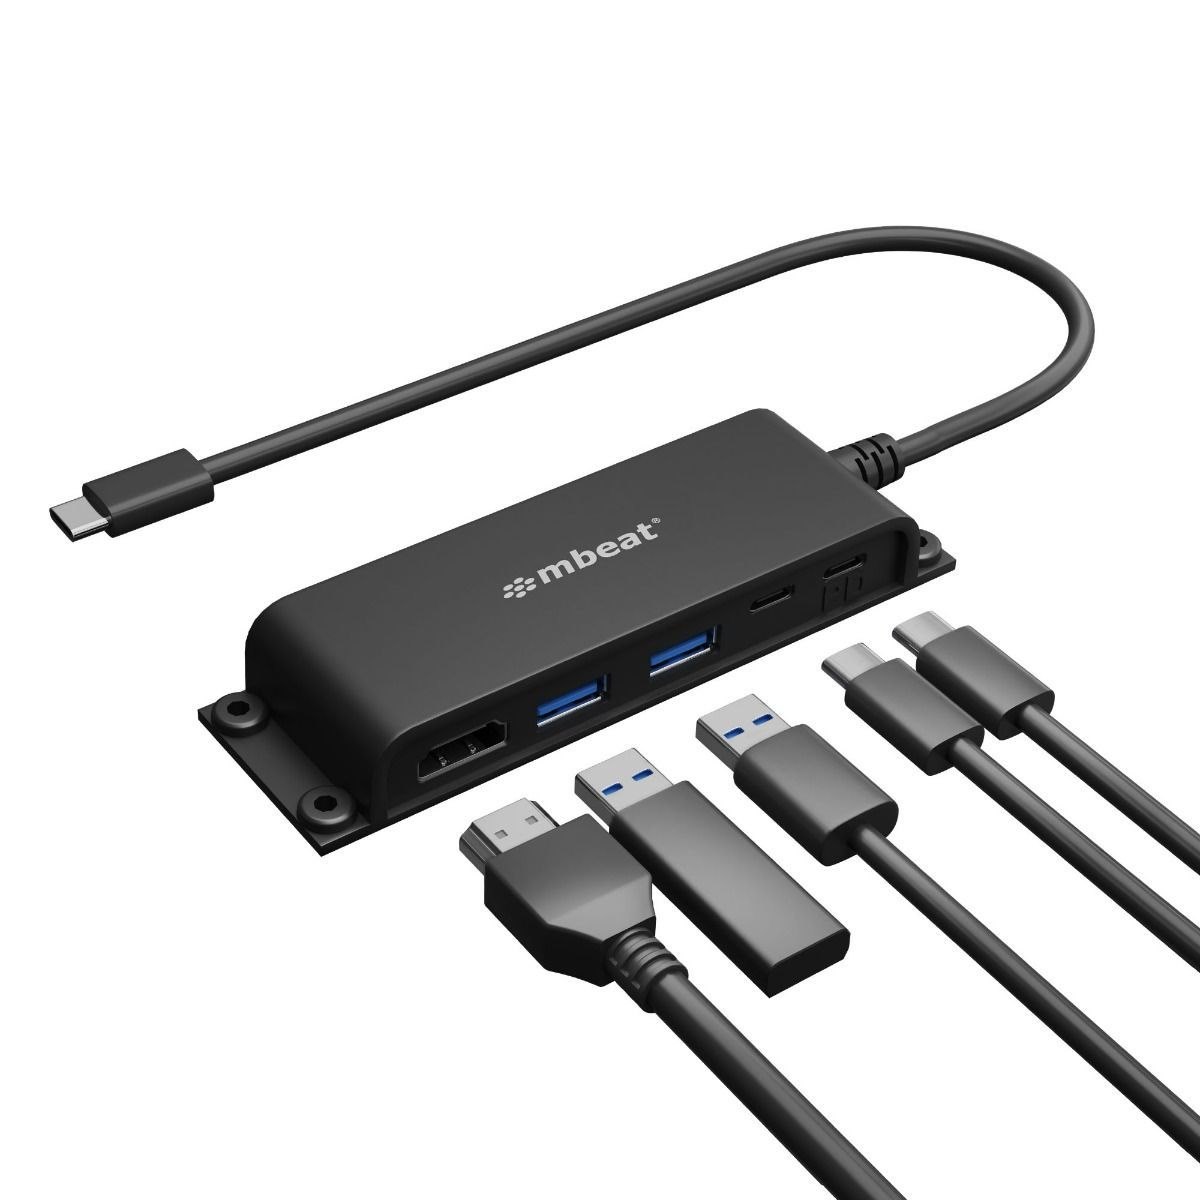 Mbeat® Mountable 5-Port Usb-C Hub - Supports 4K Hdmi Video Out And 60W Power Delivery Charging With 2 × Usb3.0 And 1 × Usb-C